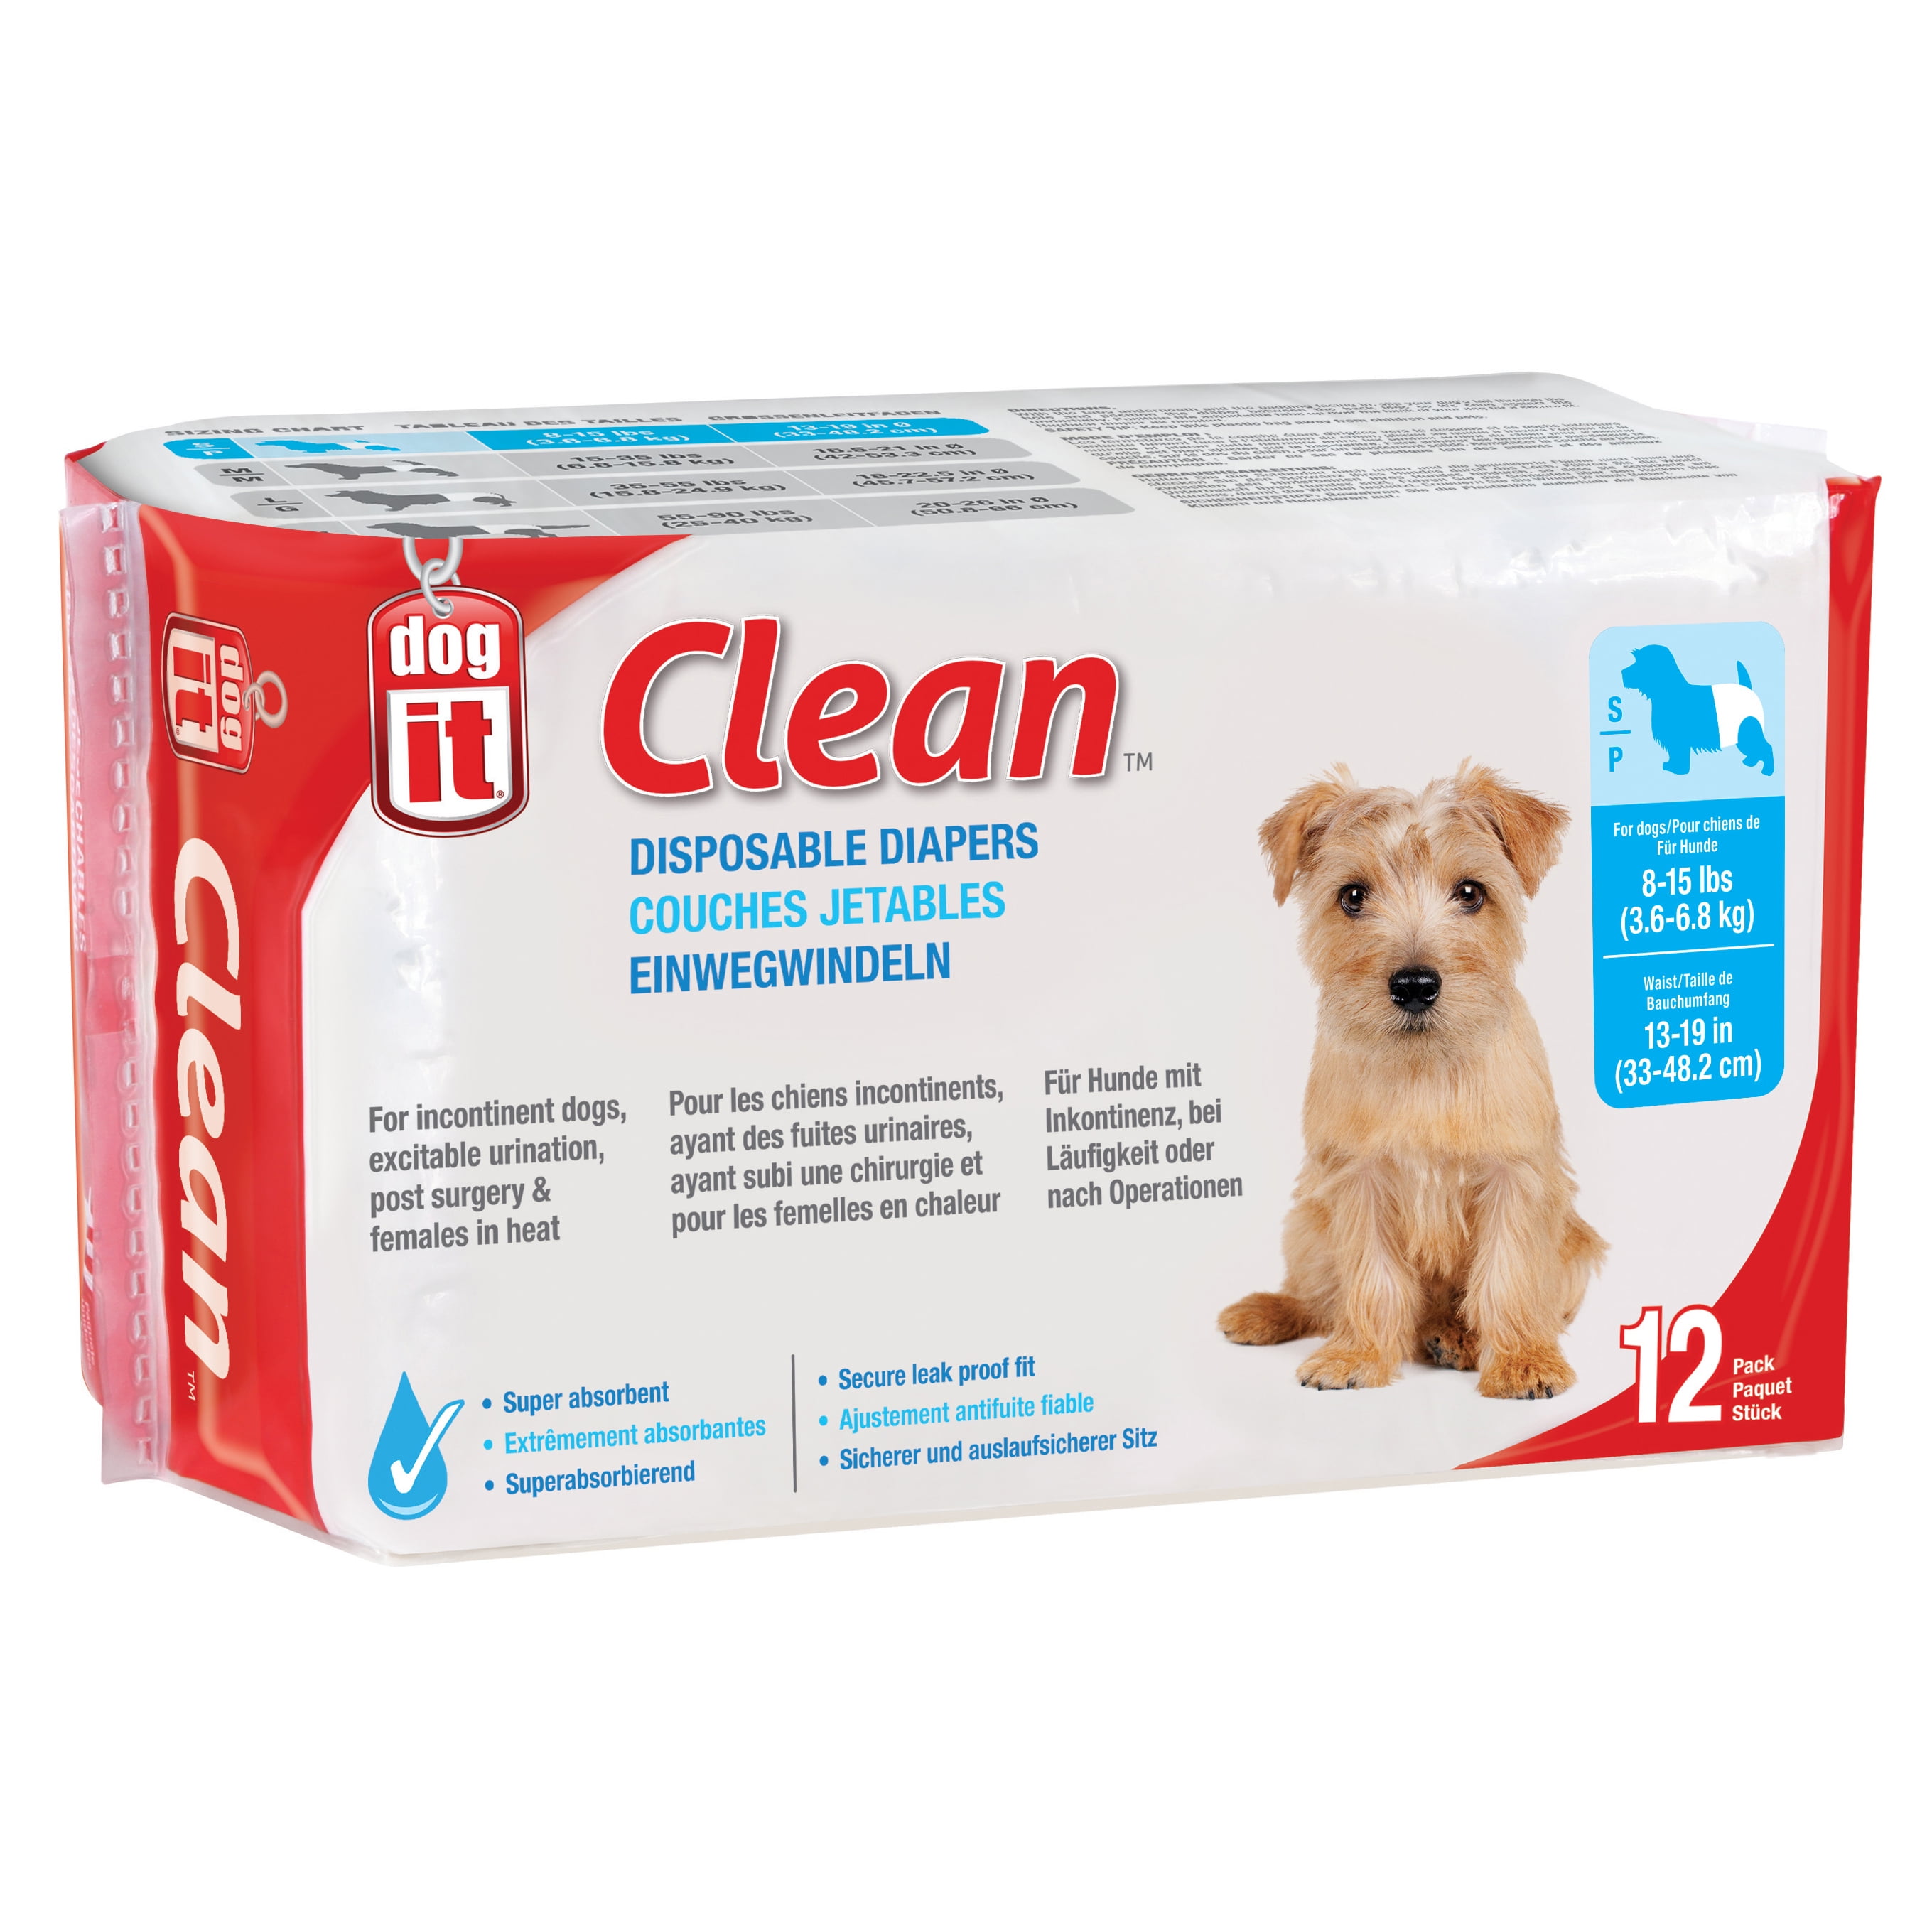 OUT Pet Care Disposable Female Dog DiapersAbsorbent with Leak Proof FitXS 